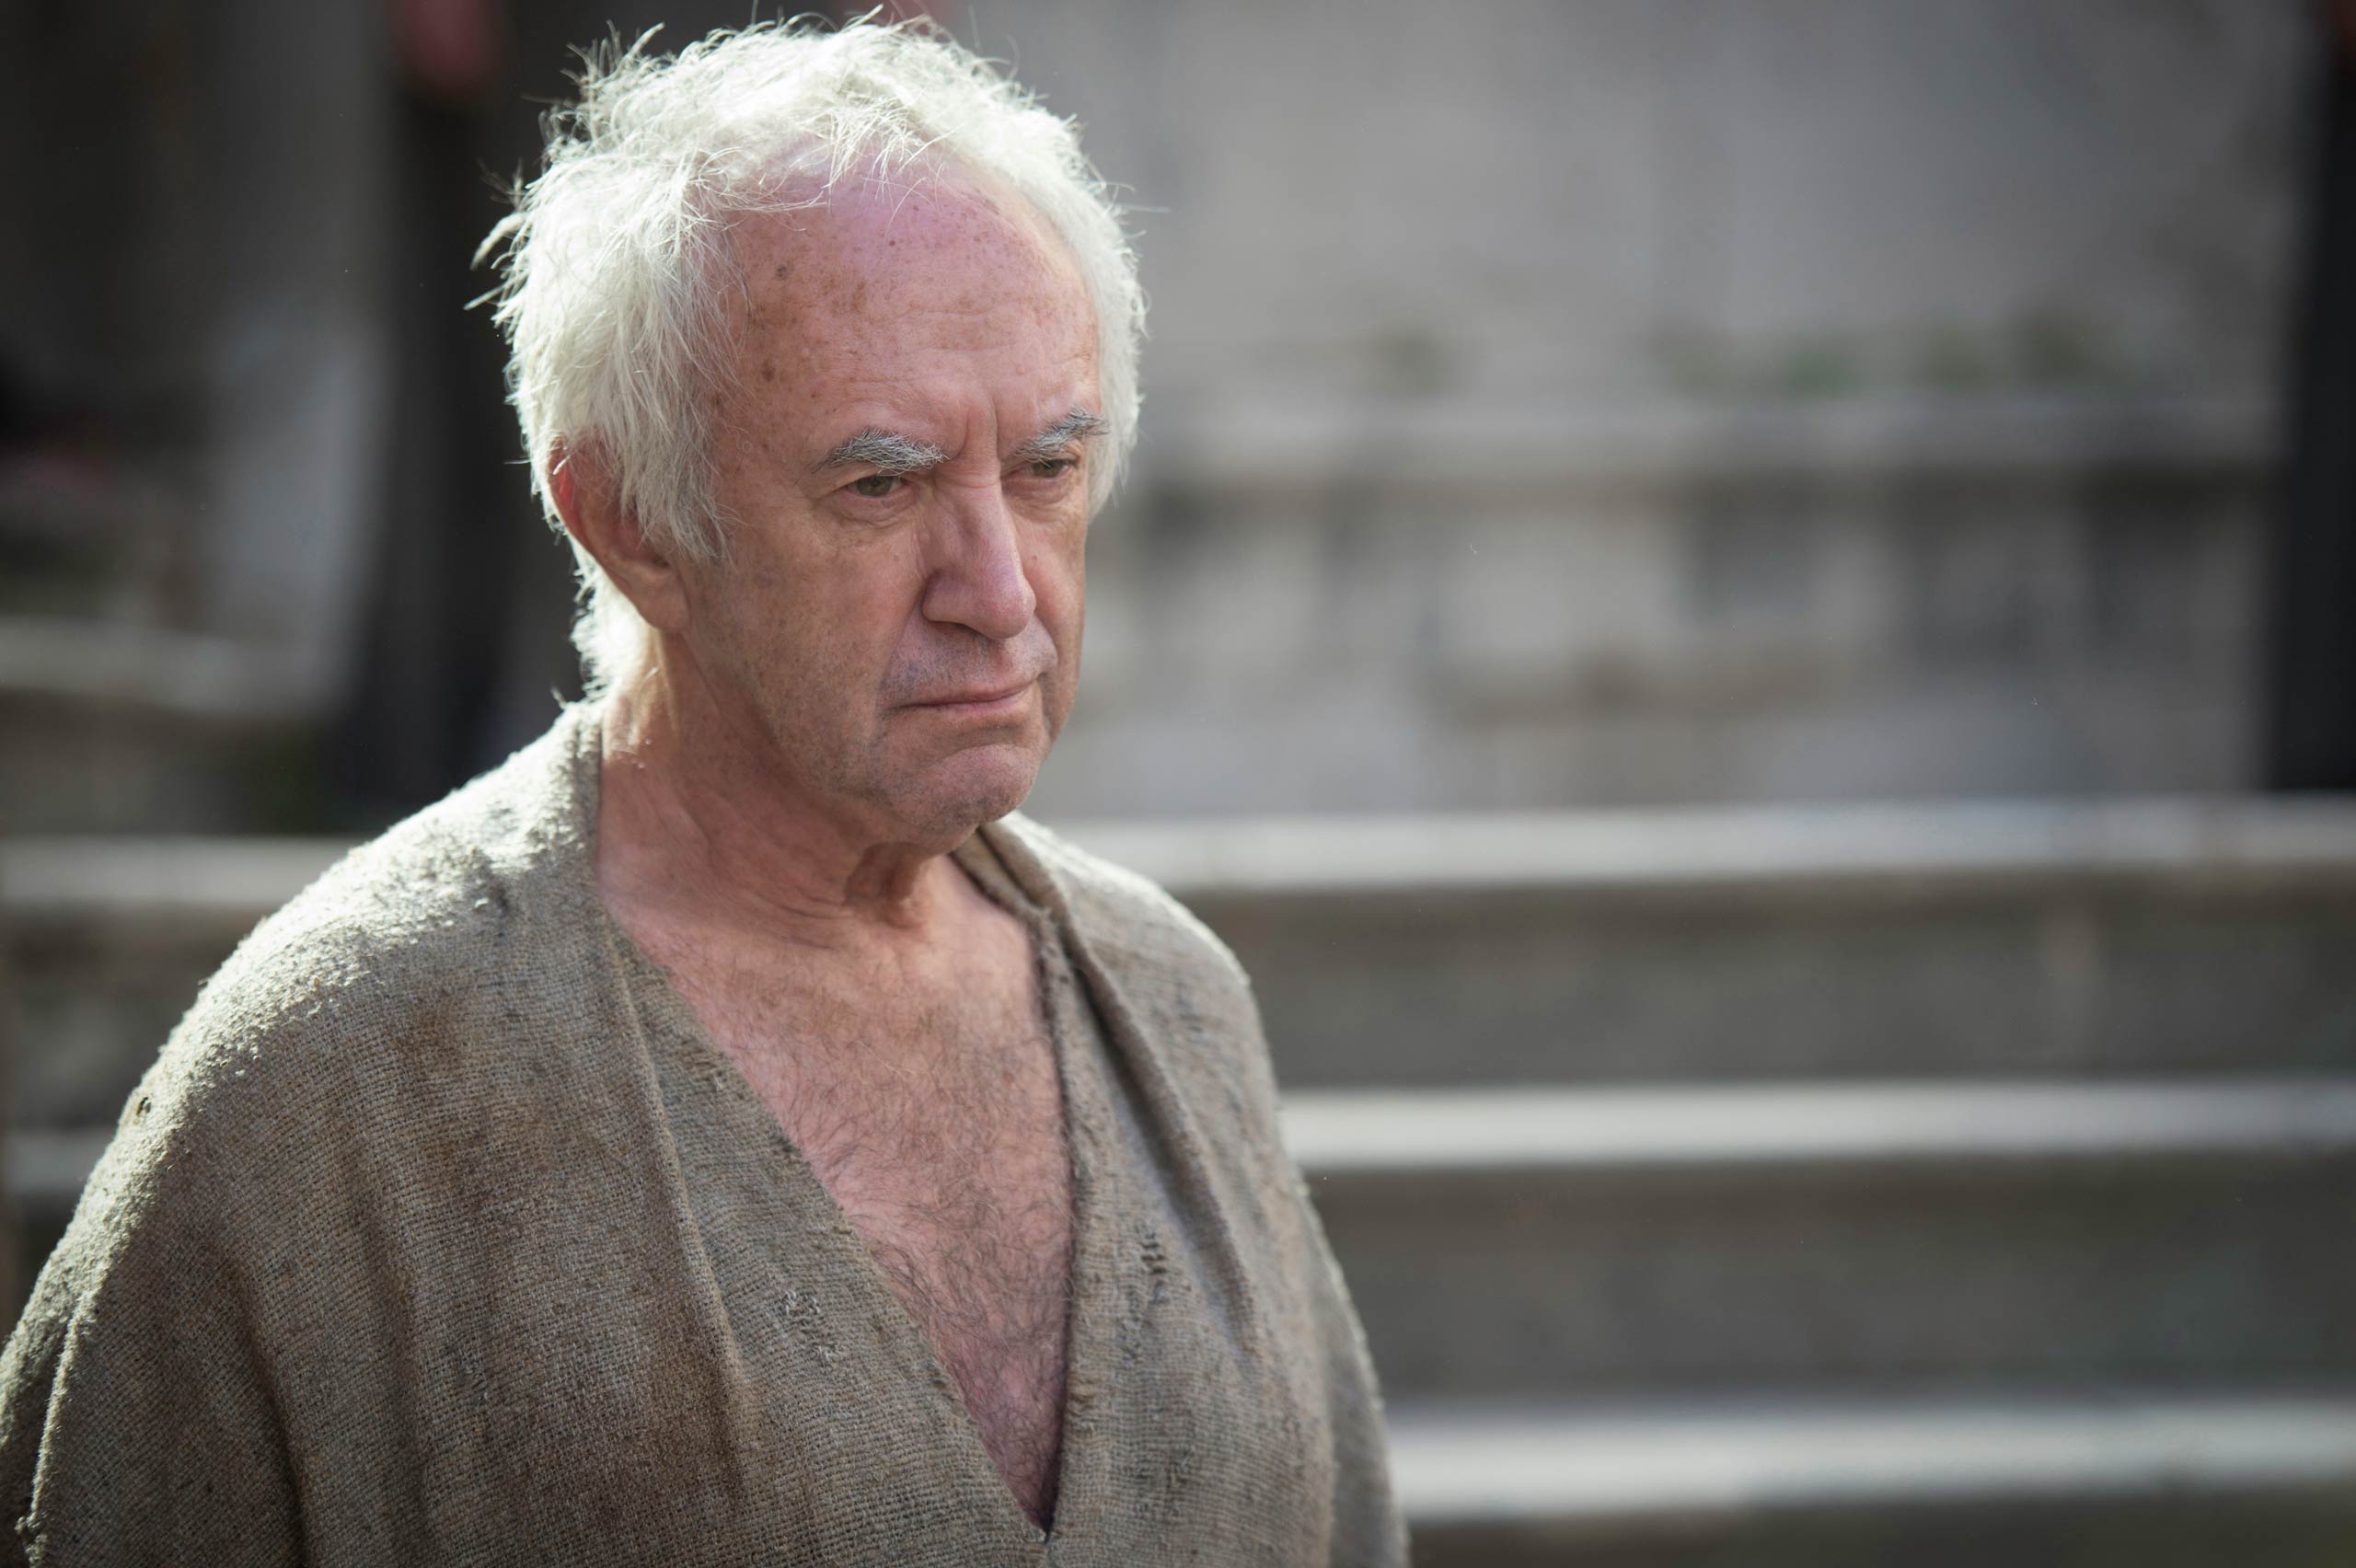 This “Game of Thrones” Quiz Will Reveal If You Can Actually Win the Iron Throne High Sparrow Game of Thrones